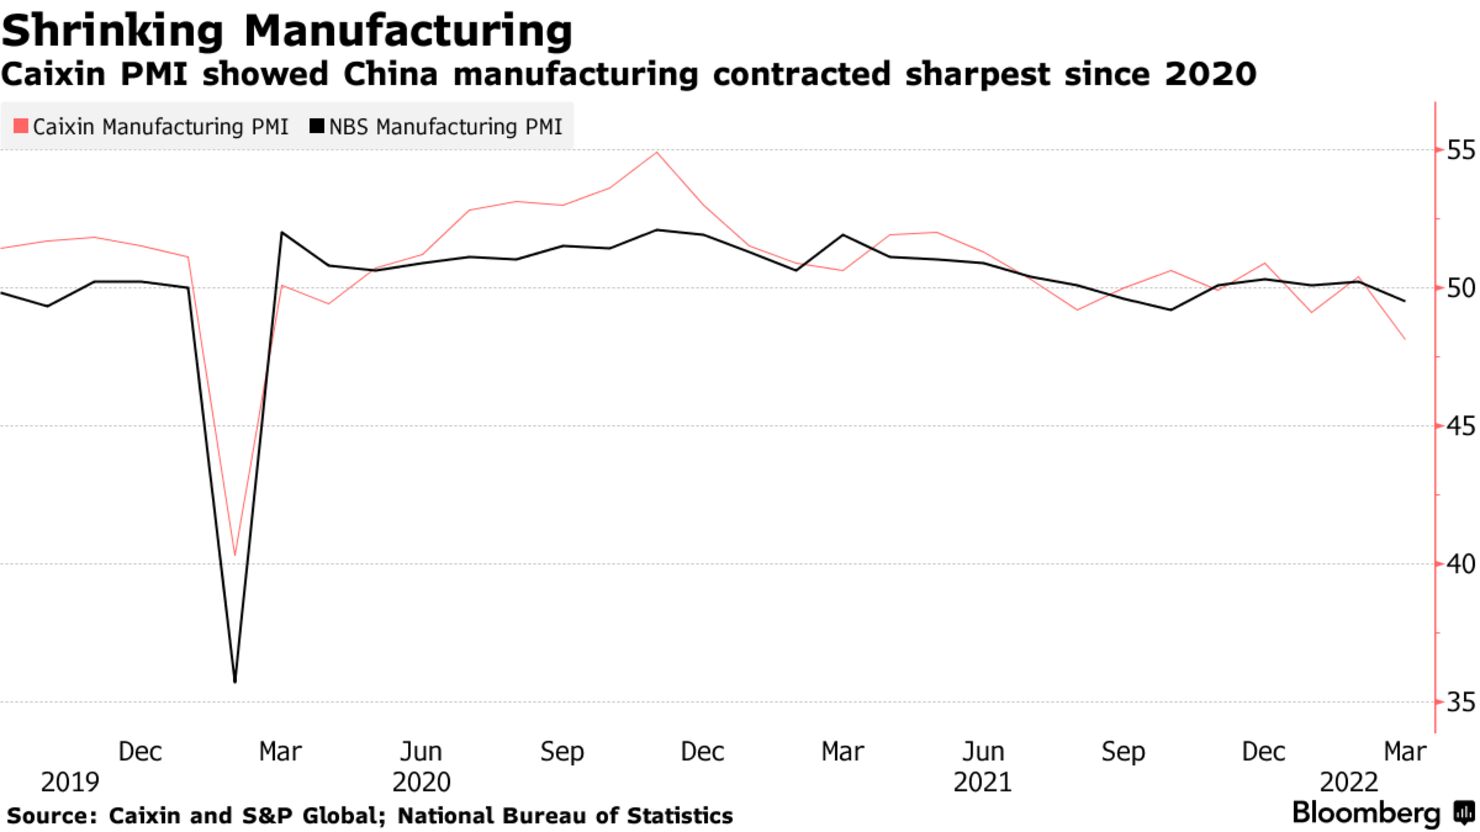 Caixin PMI showed China manufacturing contracted sharpest since 2020